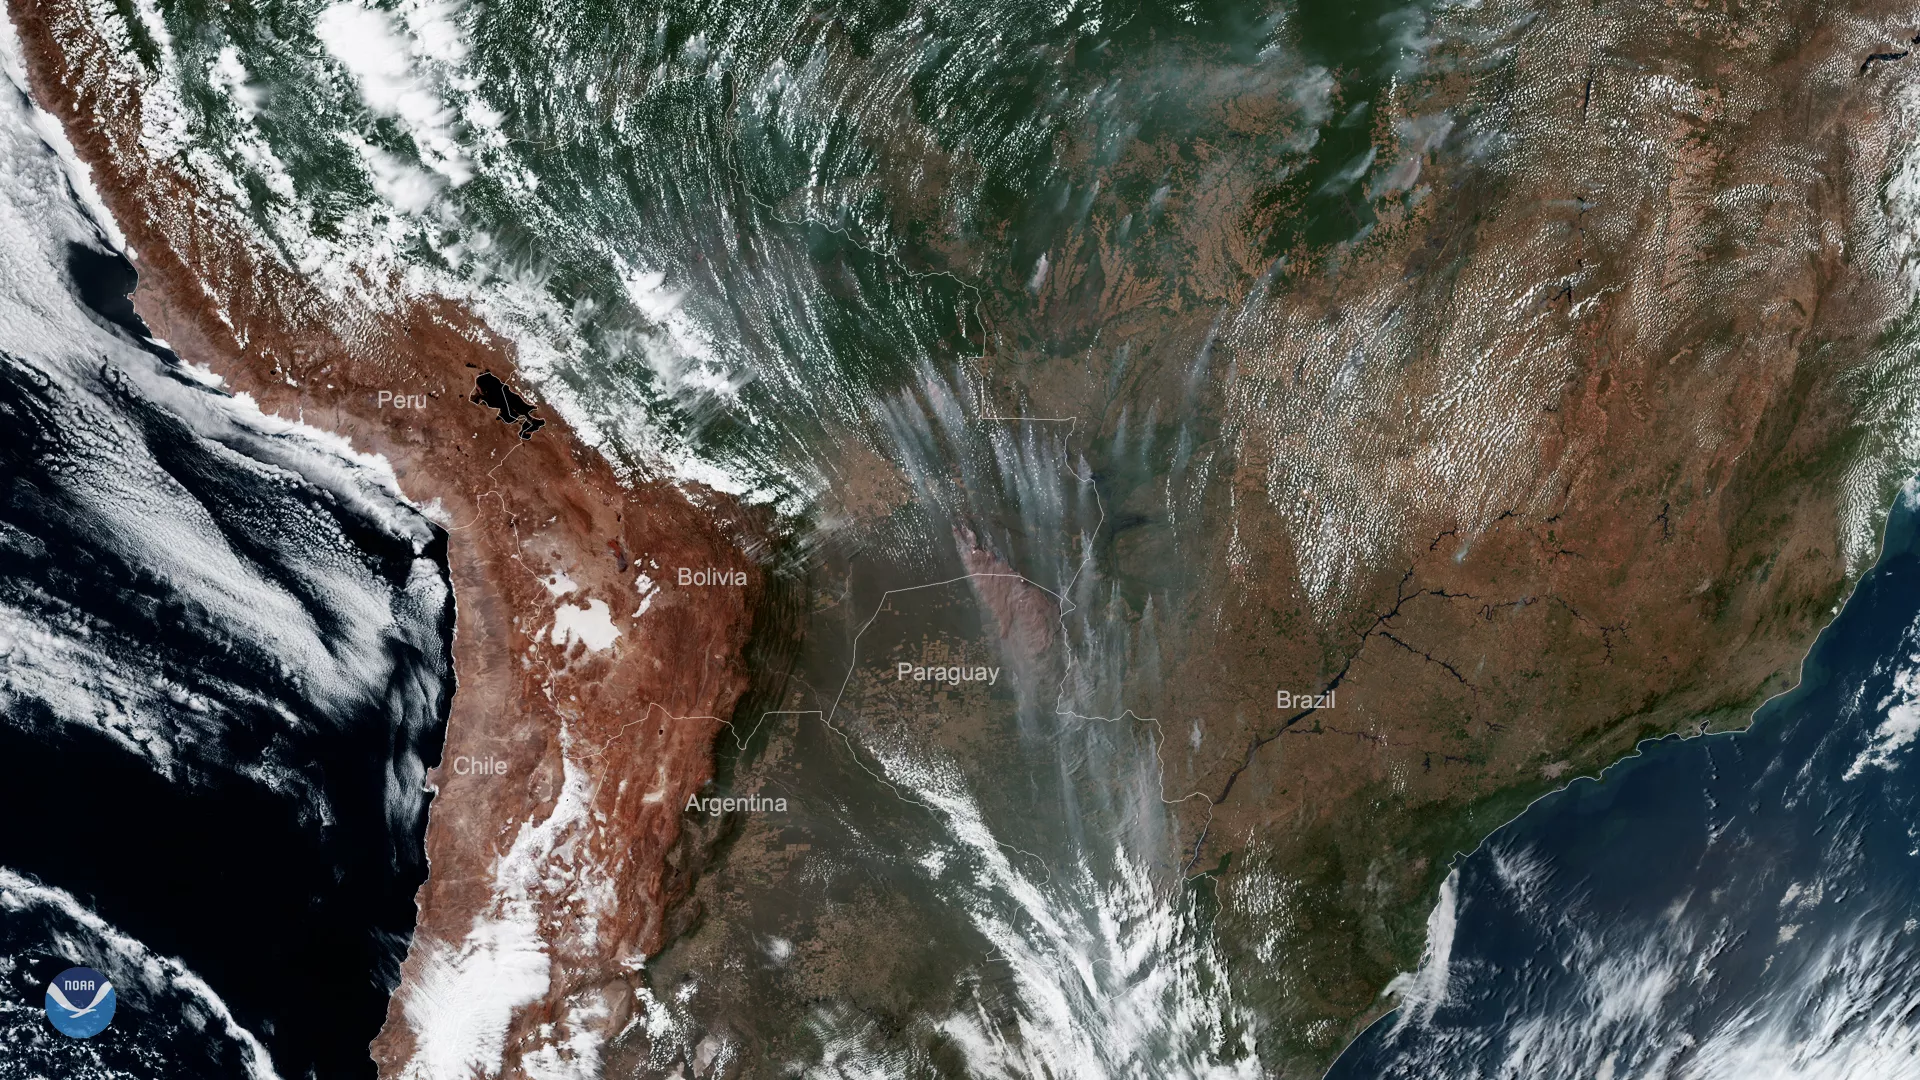 GOES East captured this image of smoke plumes on Sept. 9, 2019 across Brazil, Bolivia, and Paraguay.